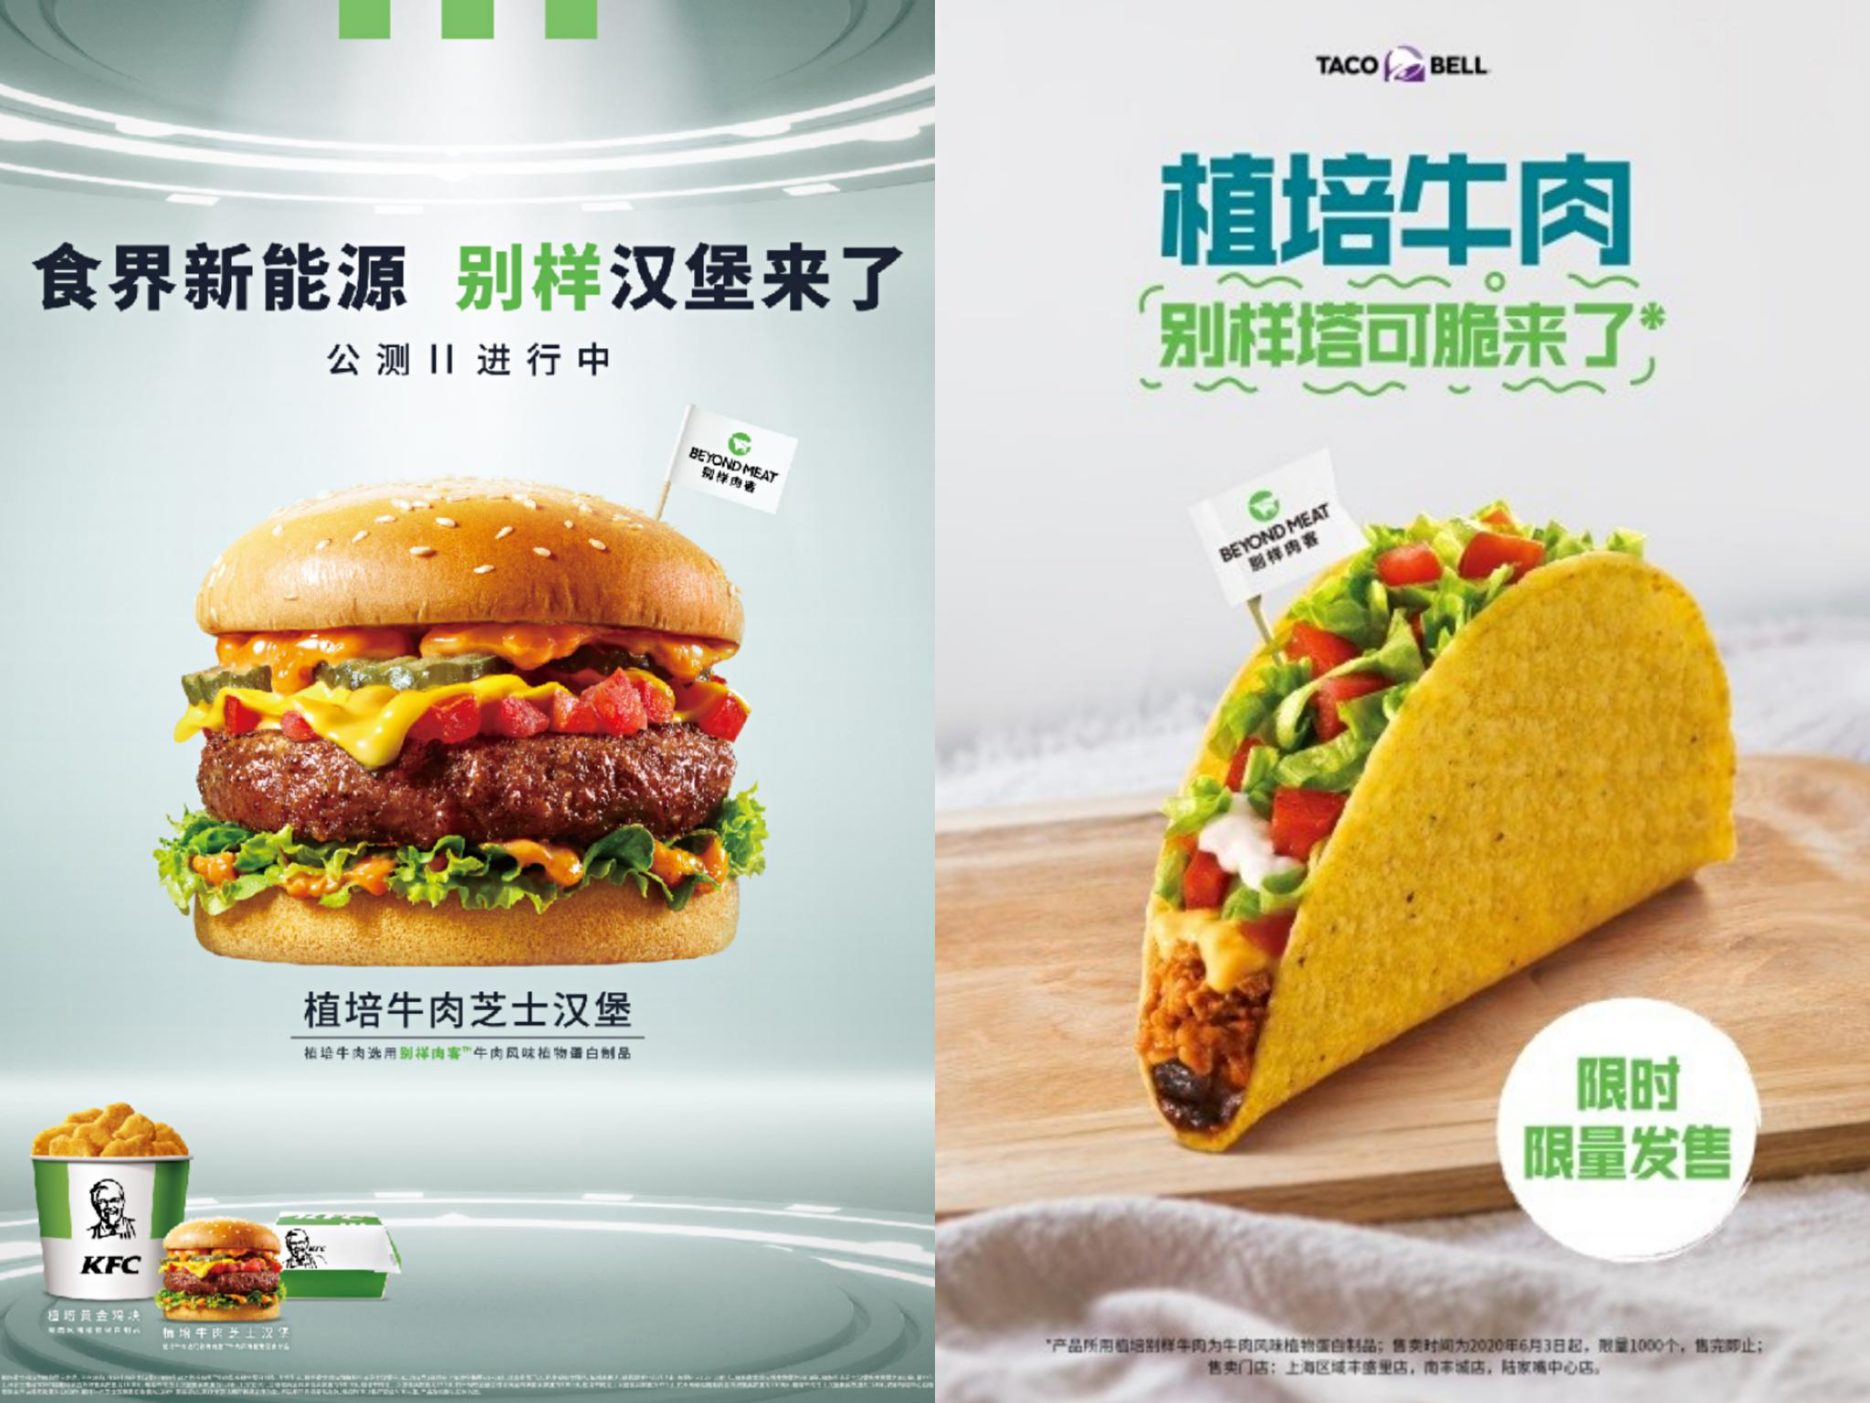 Beyond Meat burgers expand in China